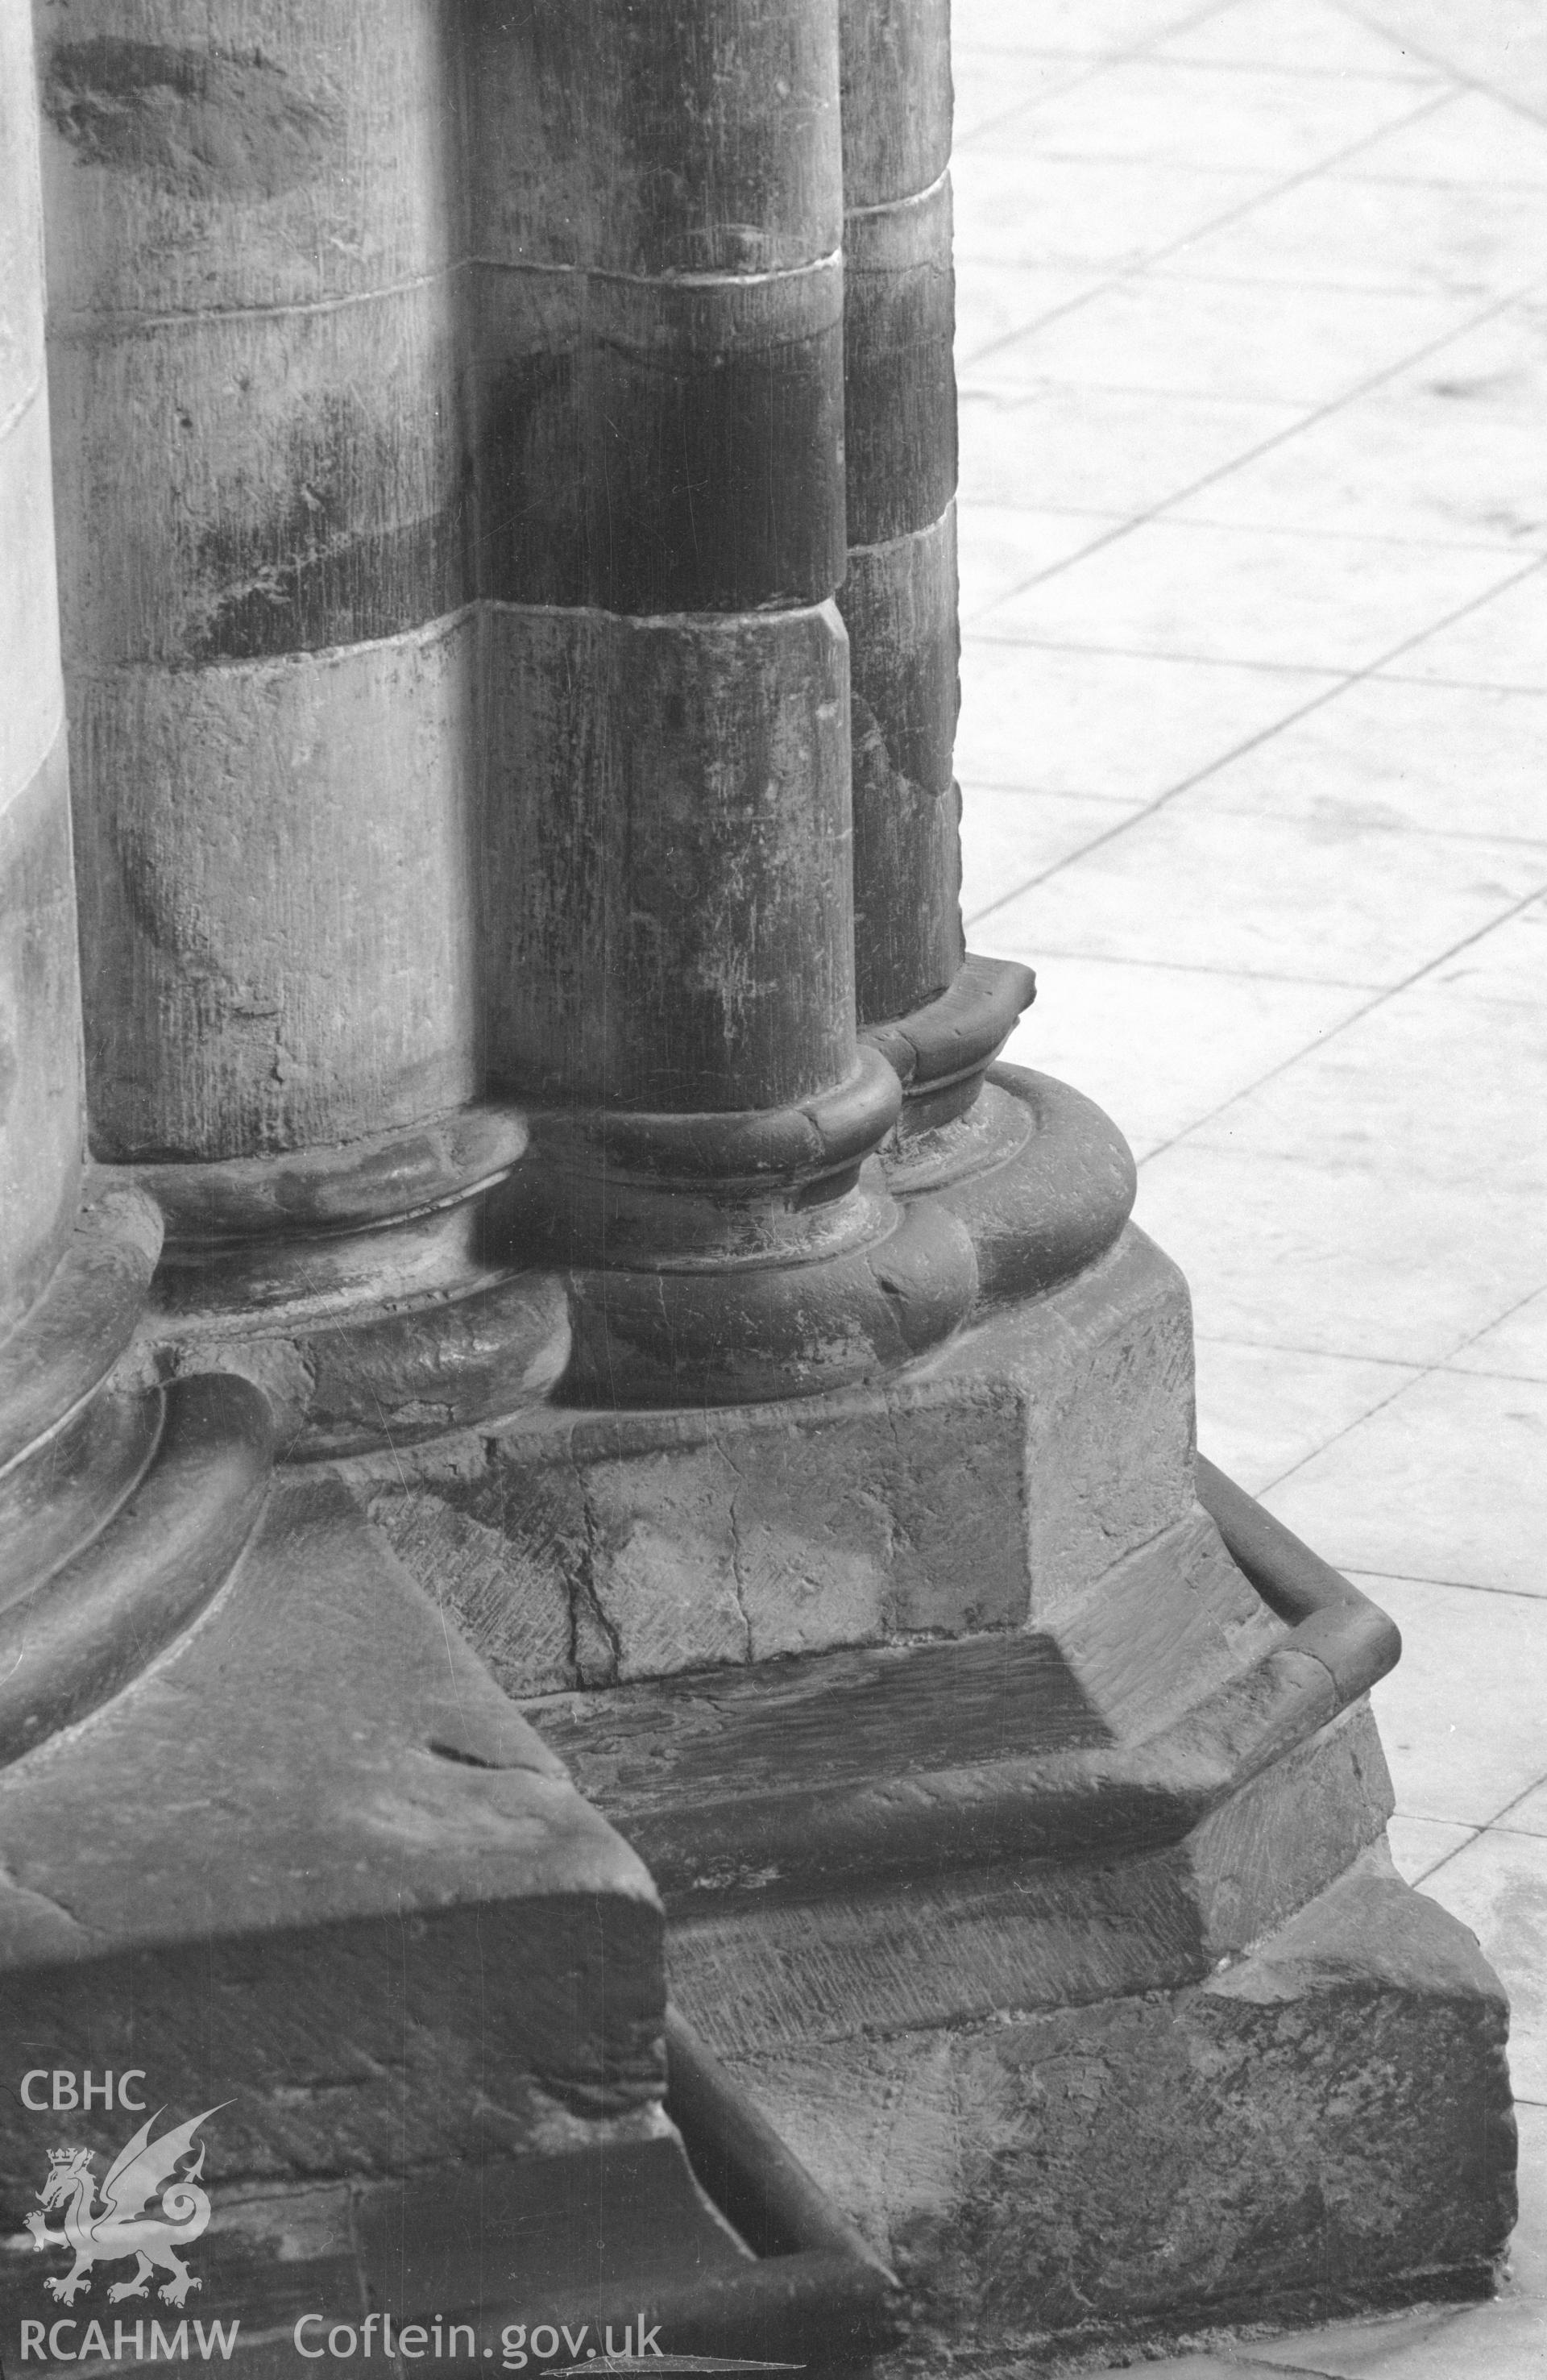 Digital copy of a black and white nitrate negative showing column base at St. David's Cathedral, taken by E.W. Lovegrove, July 1936